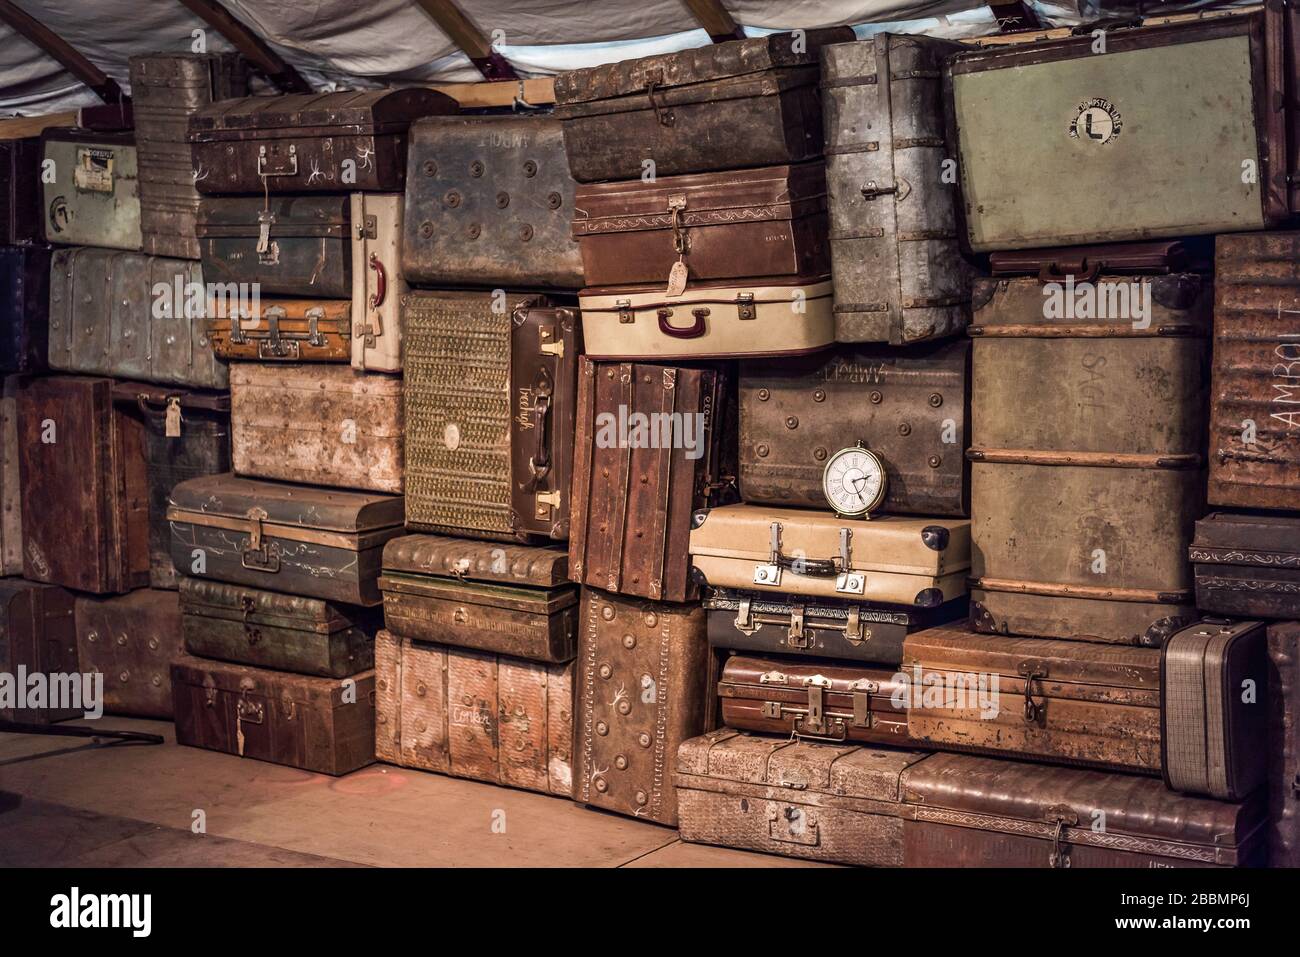 Lots of cases stacked together ready for travelling and adventures. England Stock Photo